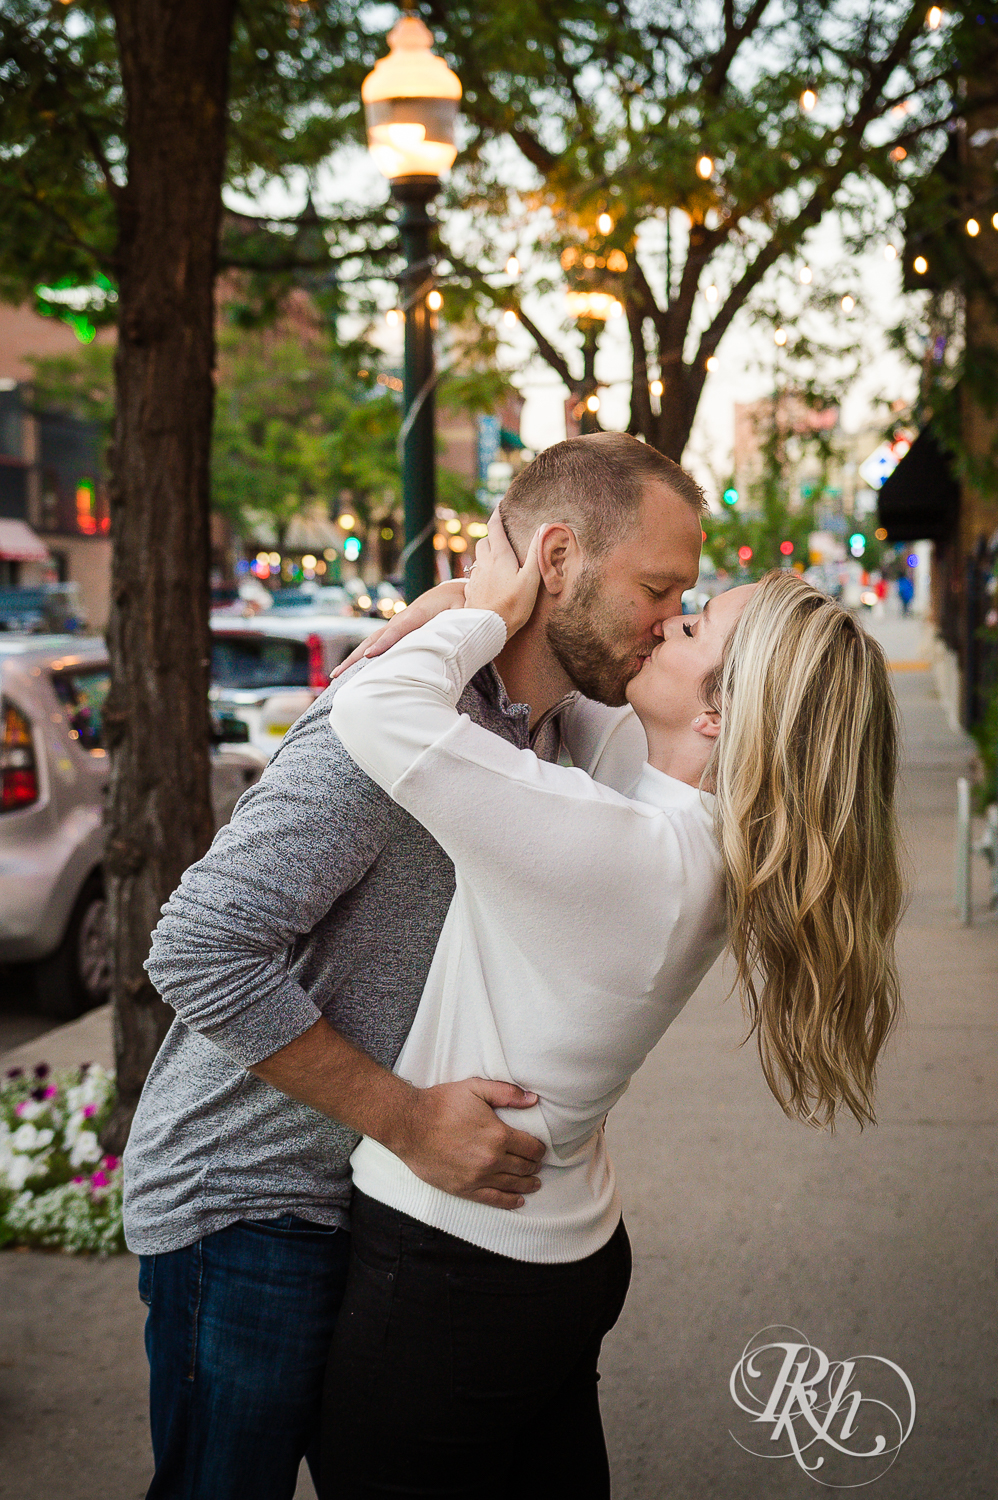 Blonde man and woman in sweaters and jeans kiss on city sidewalk at sunset in Saint Paul, Minnesota.